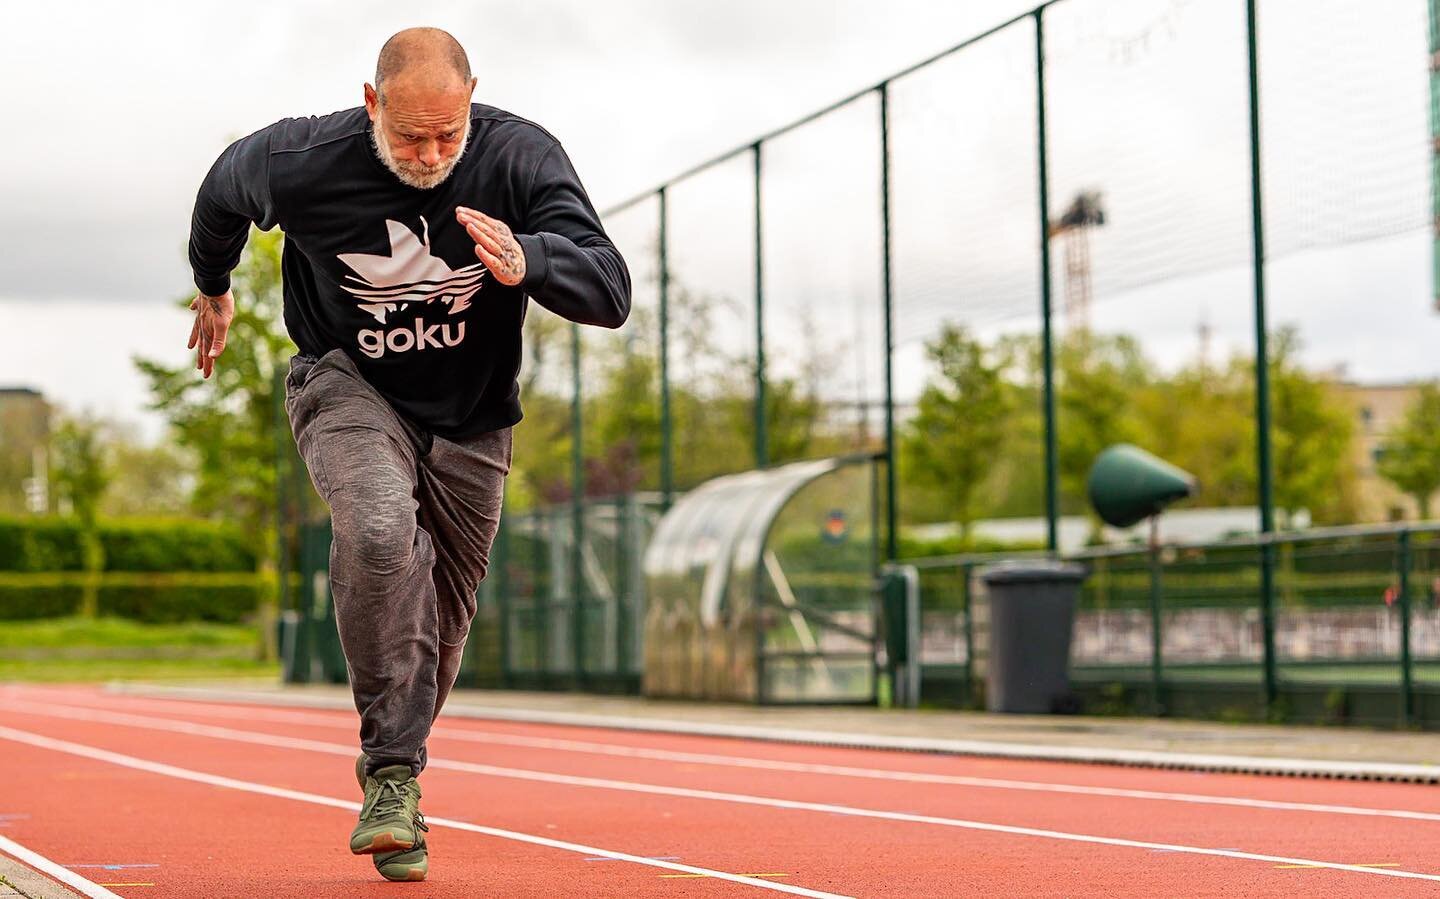 Trackday!
@julienpineau1 founder of @strongfit1 working in explosive sprints. Always learning, always evolving. 

#sprint #strongfit #trackday  #running #sportsphotography #photography